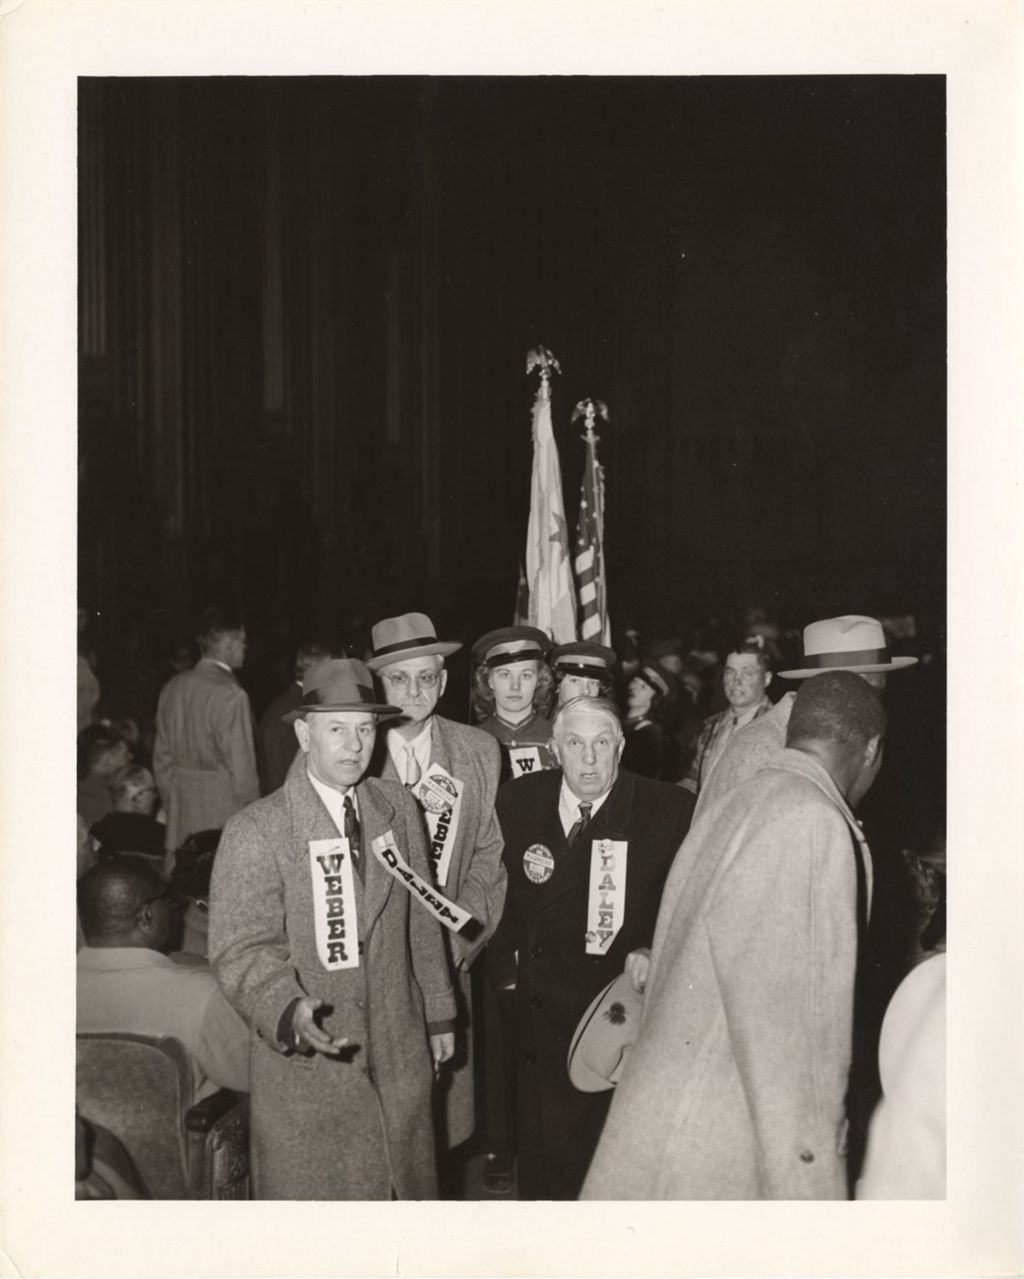 Miniature of Daley and Weber supporters at an auditorium event